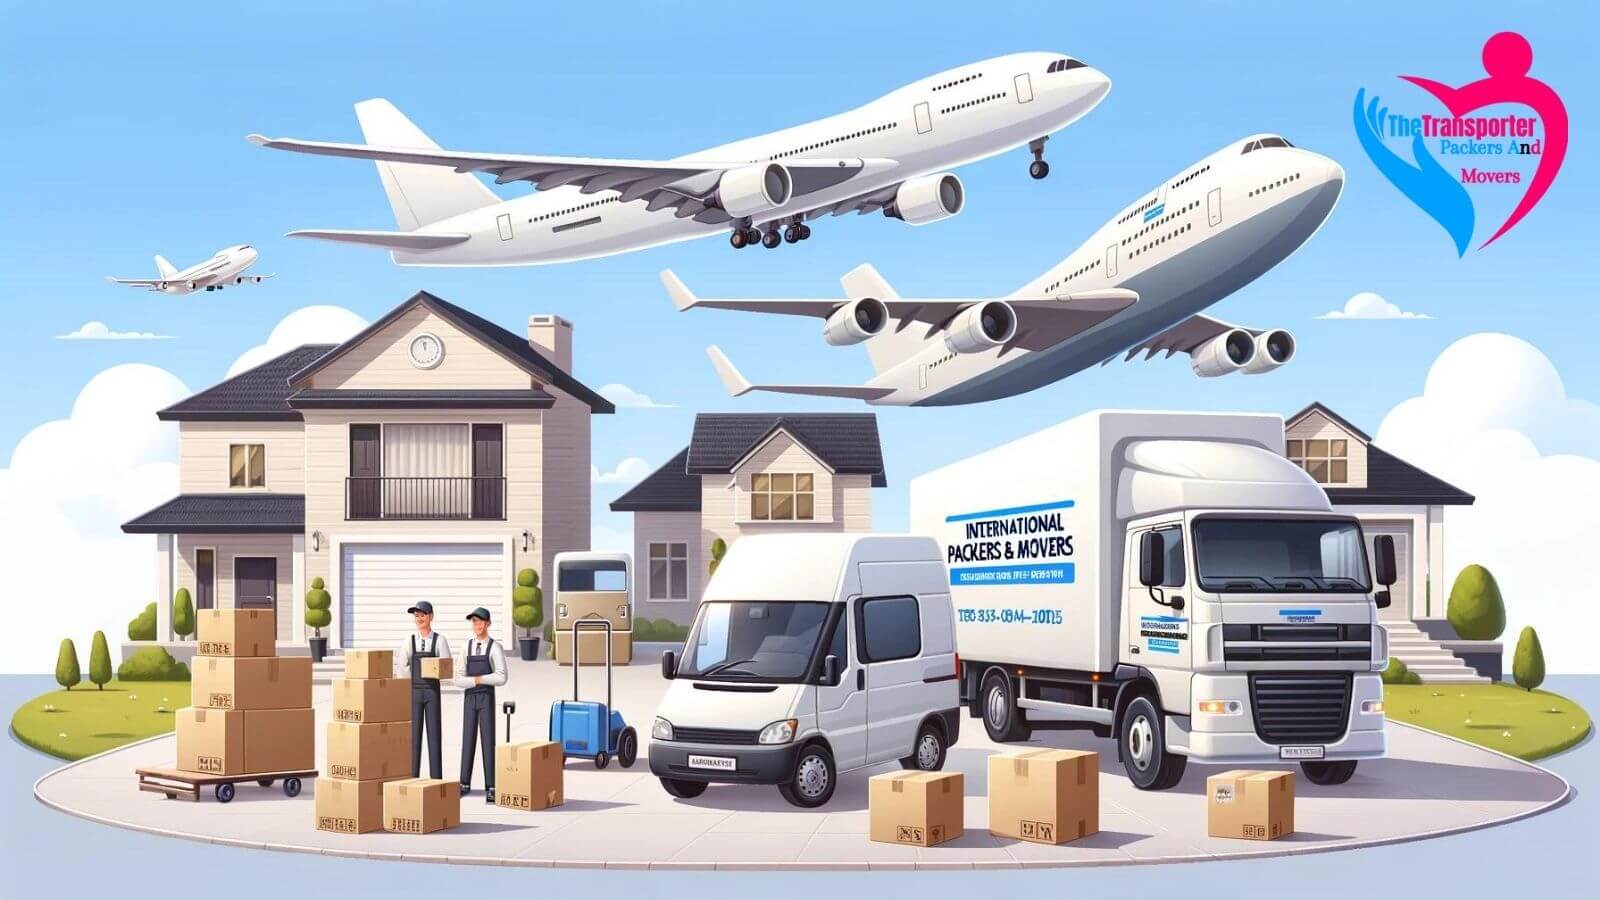 Agra International Packers and Movers: Ensuring a Smooth Move